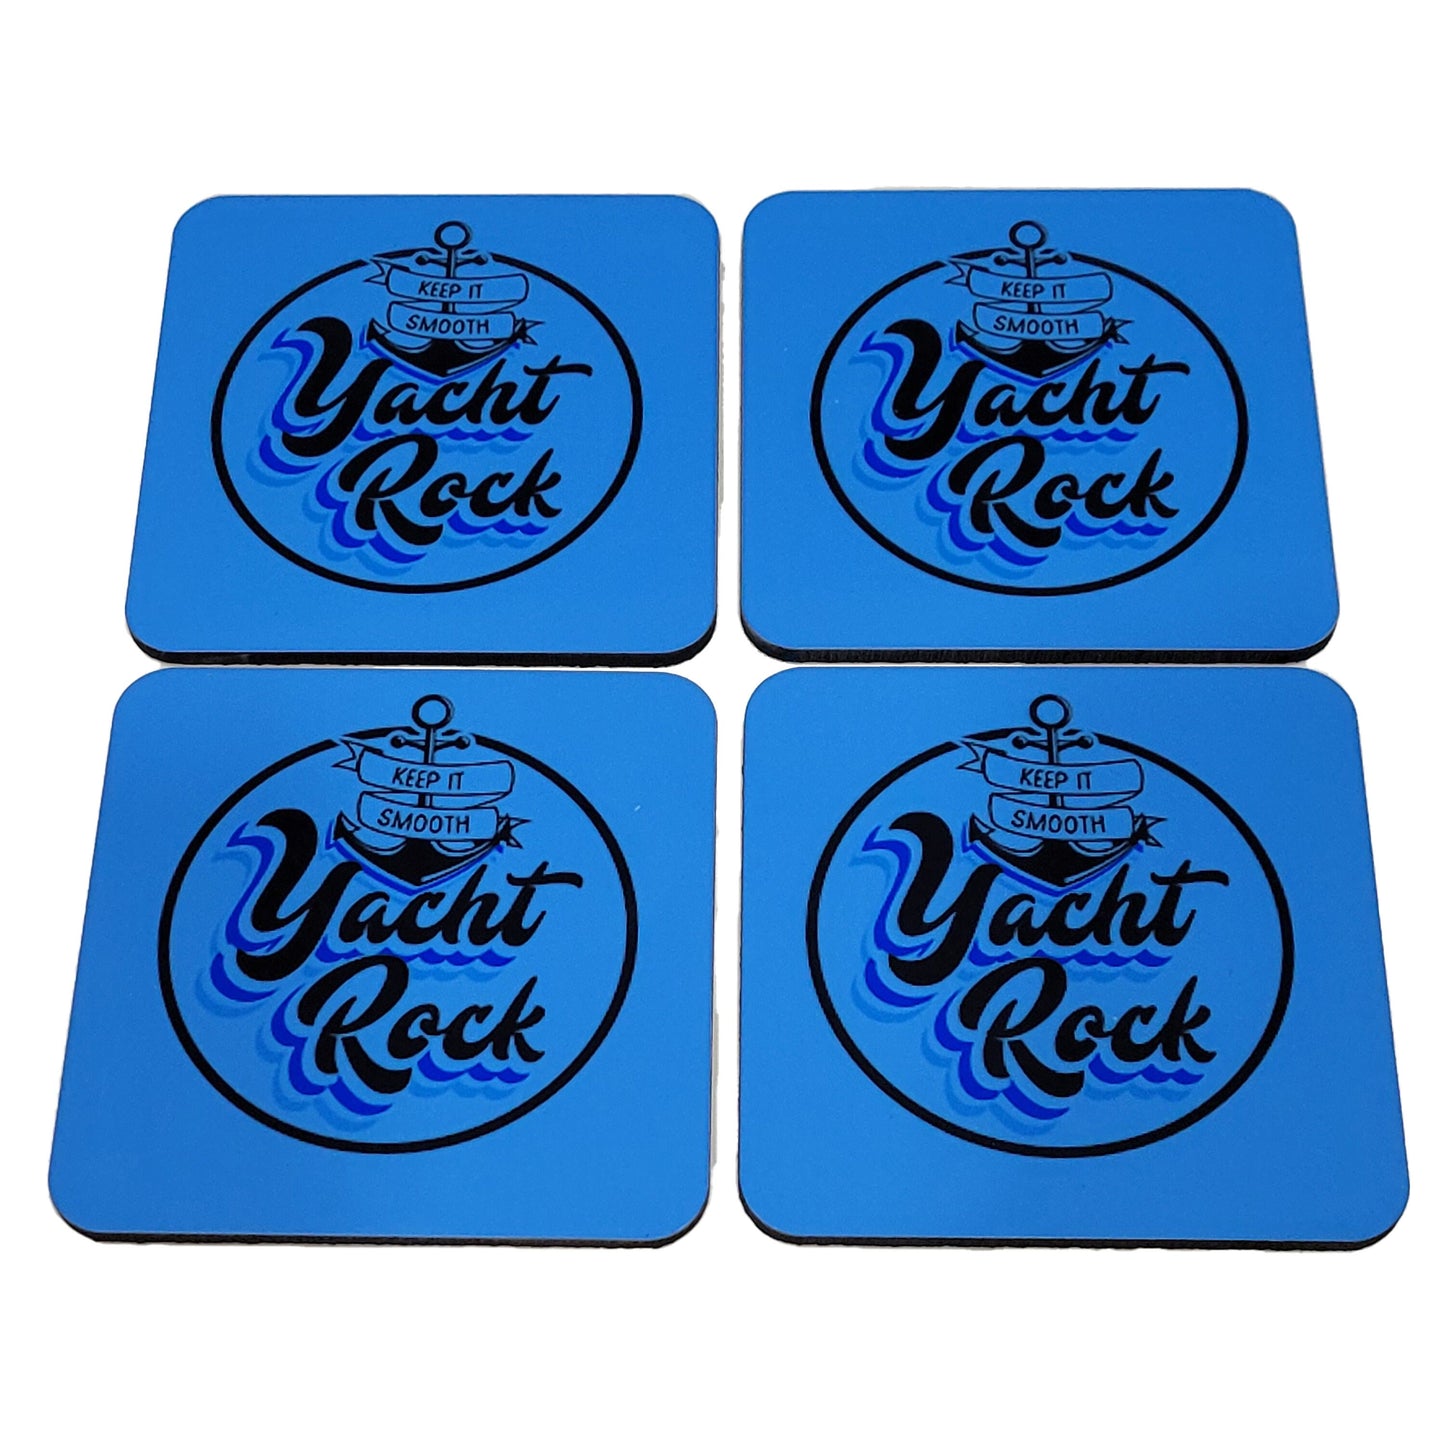 Set of 4 Yacht Rock drink coasters perfect for the boat